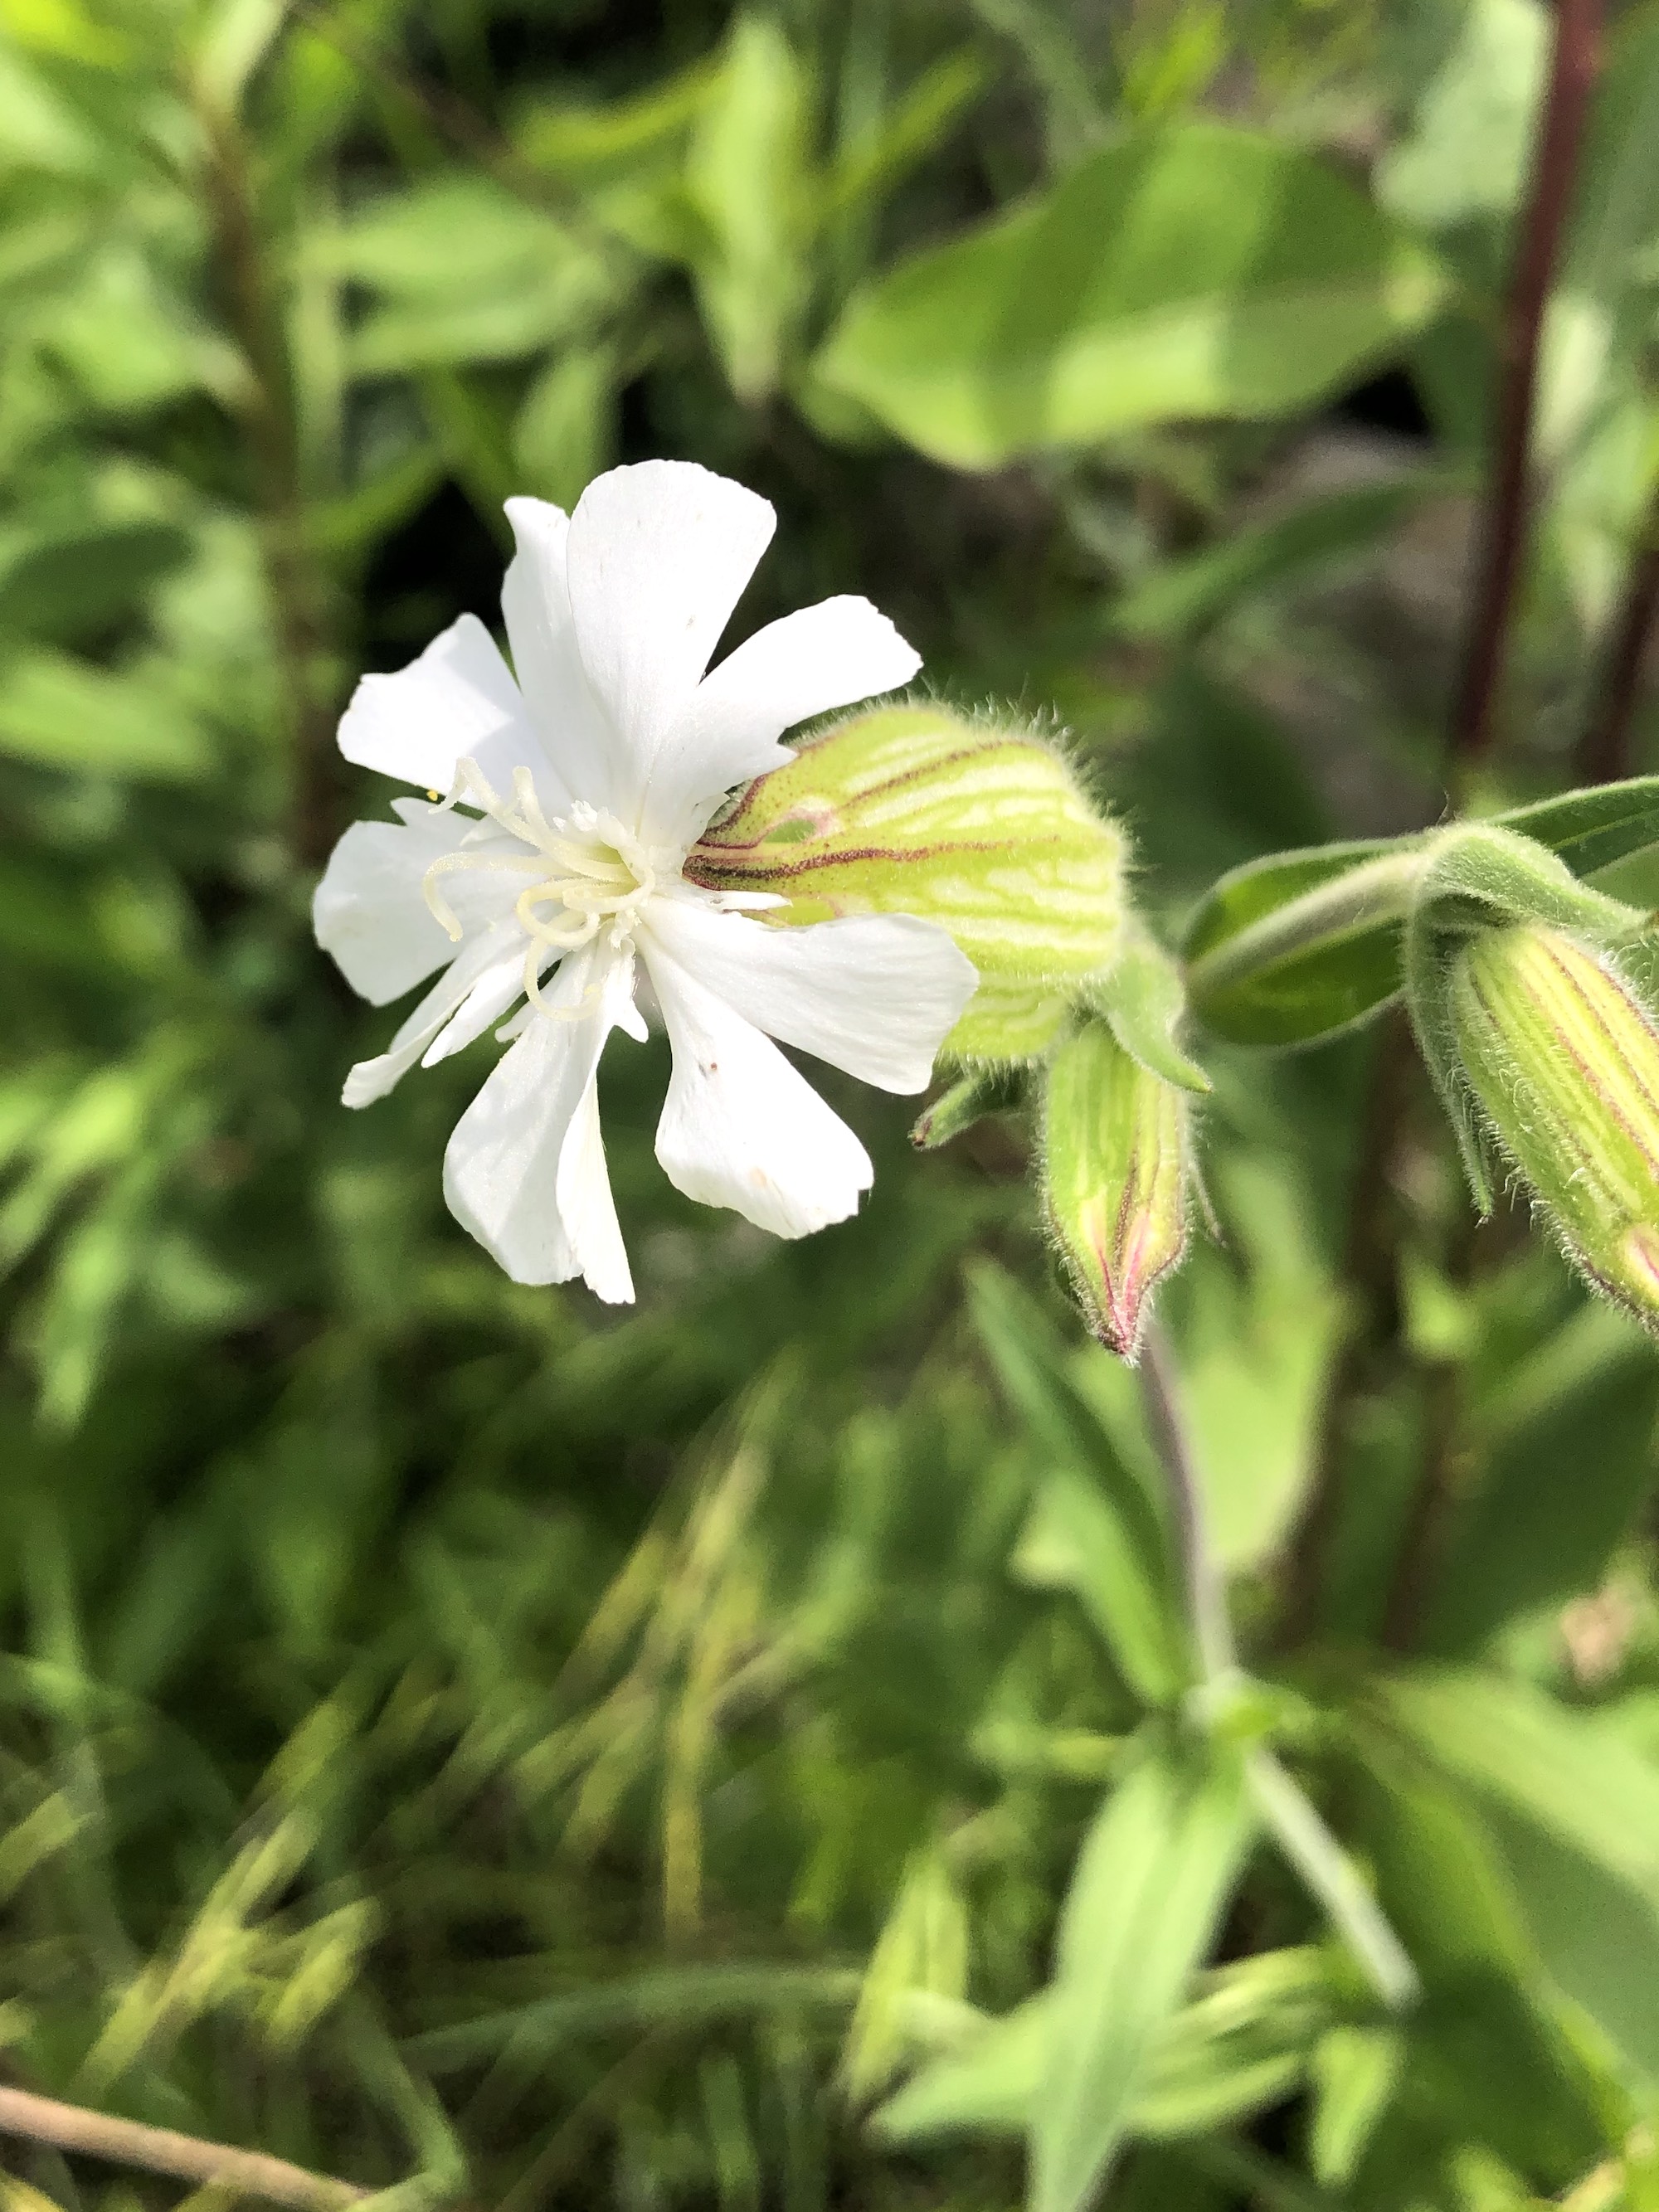 White Campion in UW Arboretum near Visitor Center in Madison, Wisconsin on May 31, 2021.